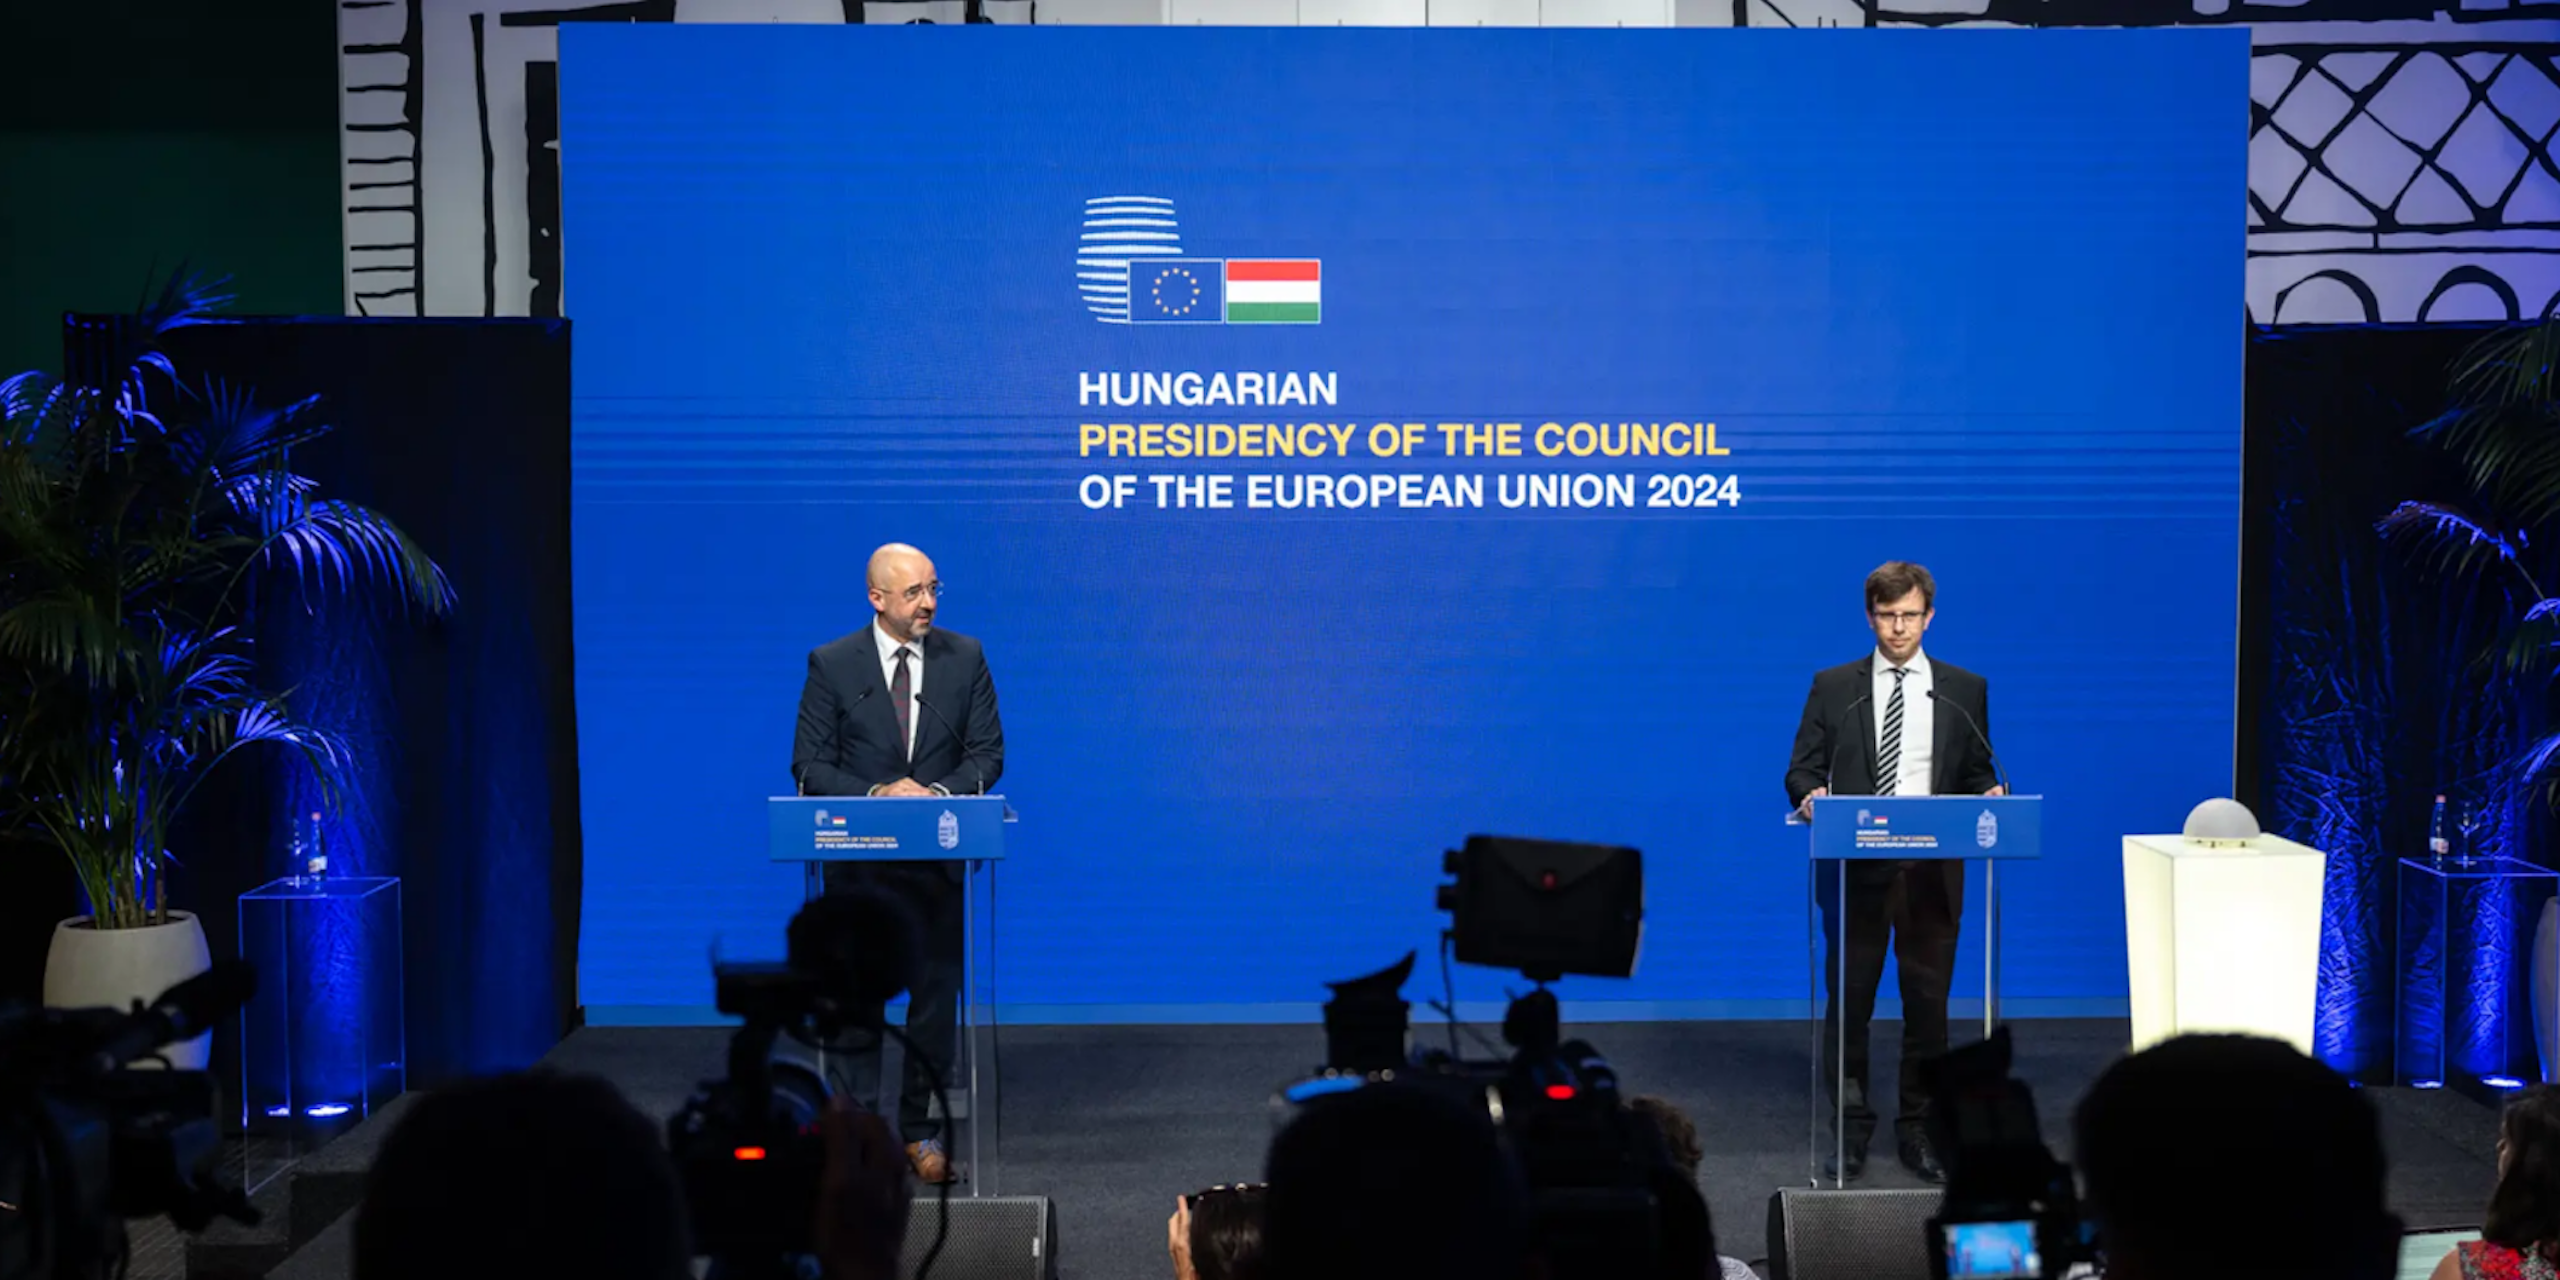 ‘Make Europe Great Again’: far right Hungary takes over presidency of the Council of the European Union